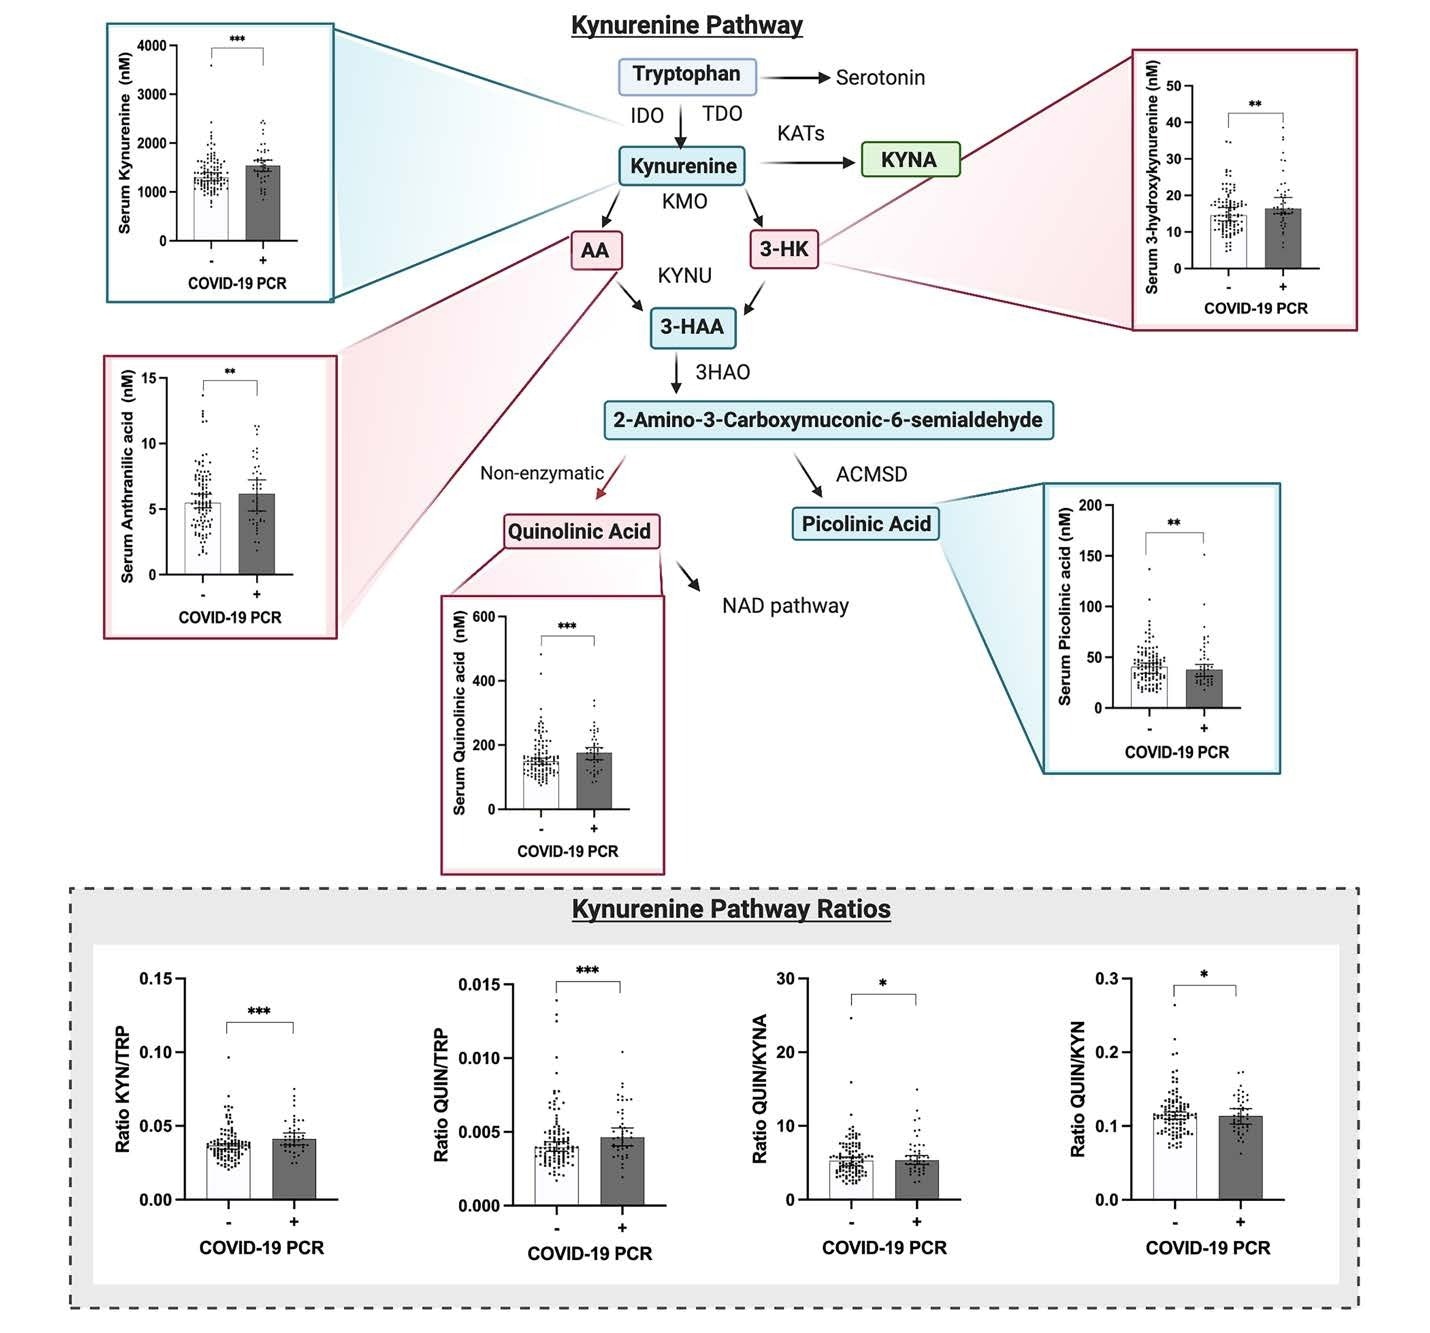 The kynurenine pathway is altered in mild COVID-19 patients with elevated levels of neurotoxic metabolites. Significantly increased levels of kynurenine (age and gender adjusted data, ANOVA test F: 11.195, p.<0.001 ***), 3-hydroxykynurenine (data adjusted for age and sex, ANOVA test F: 3.390,